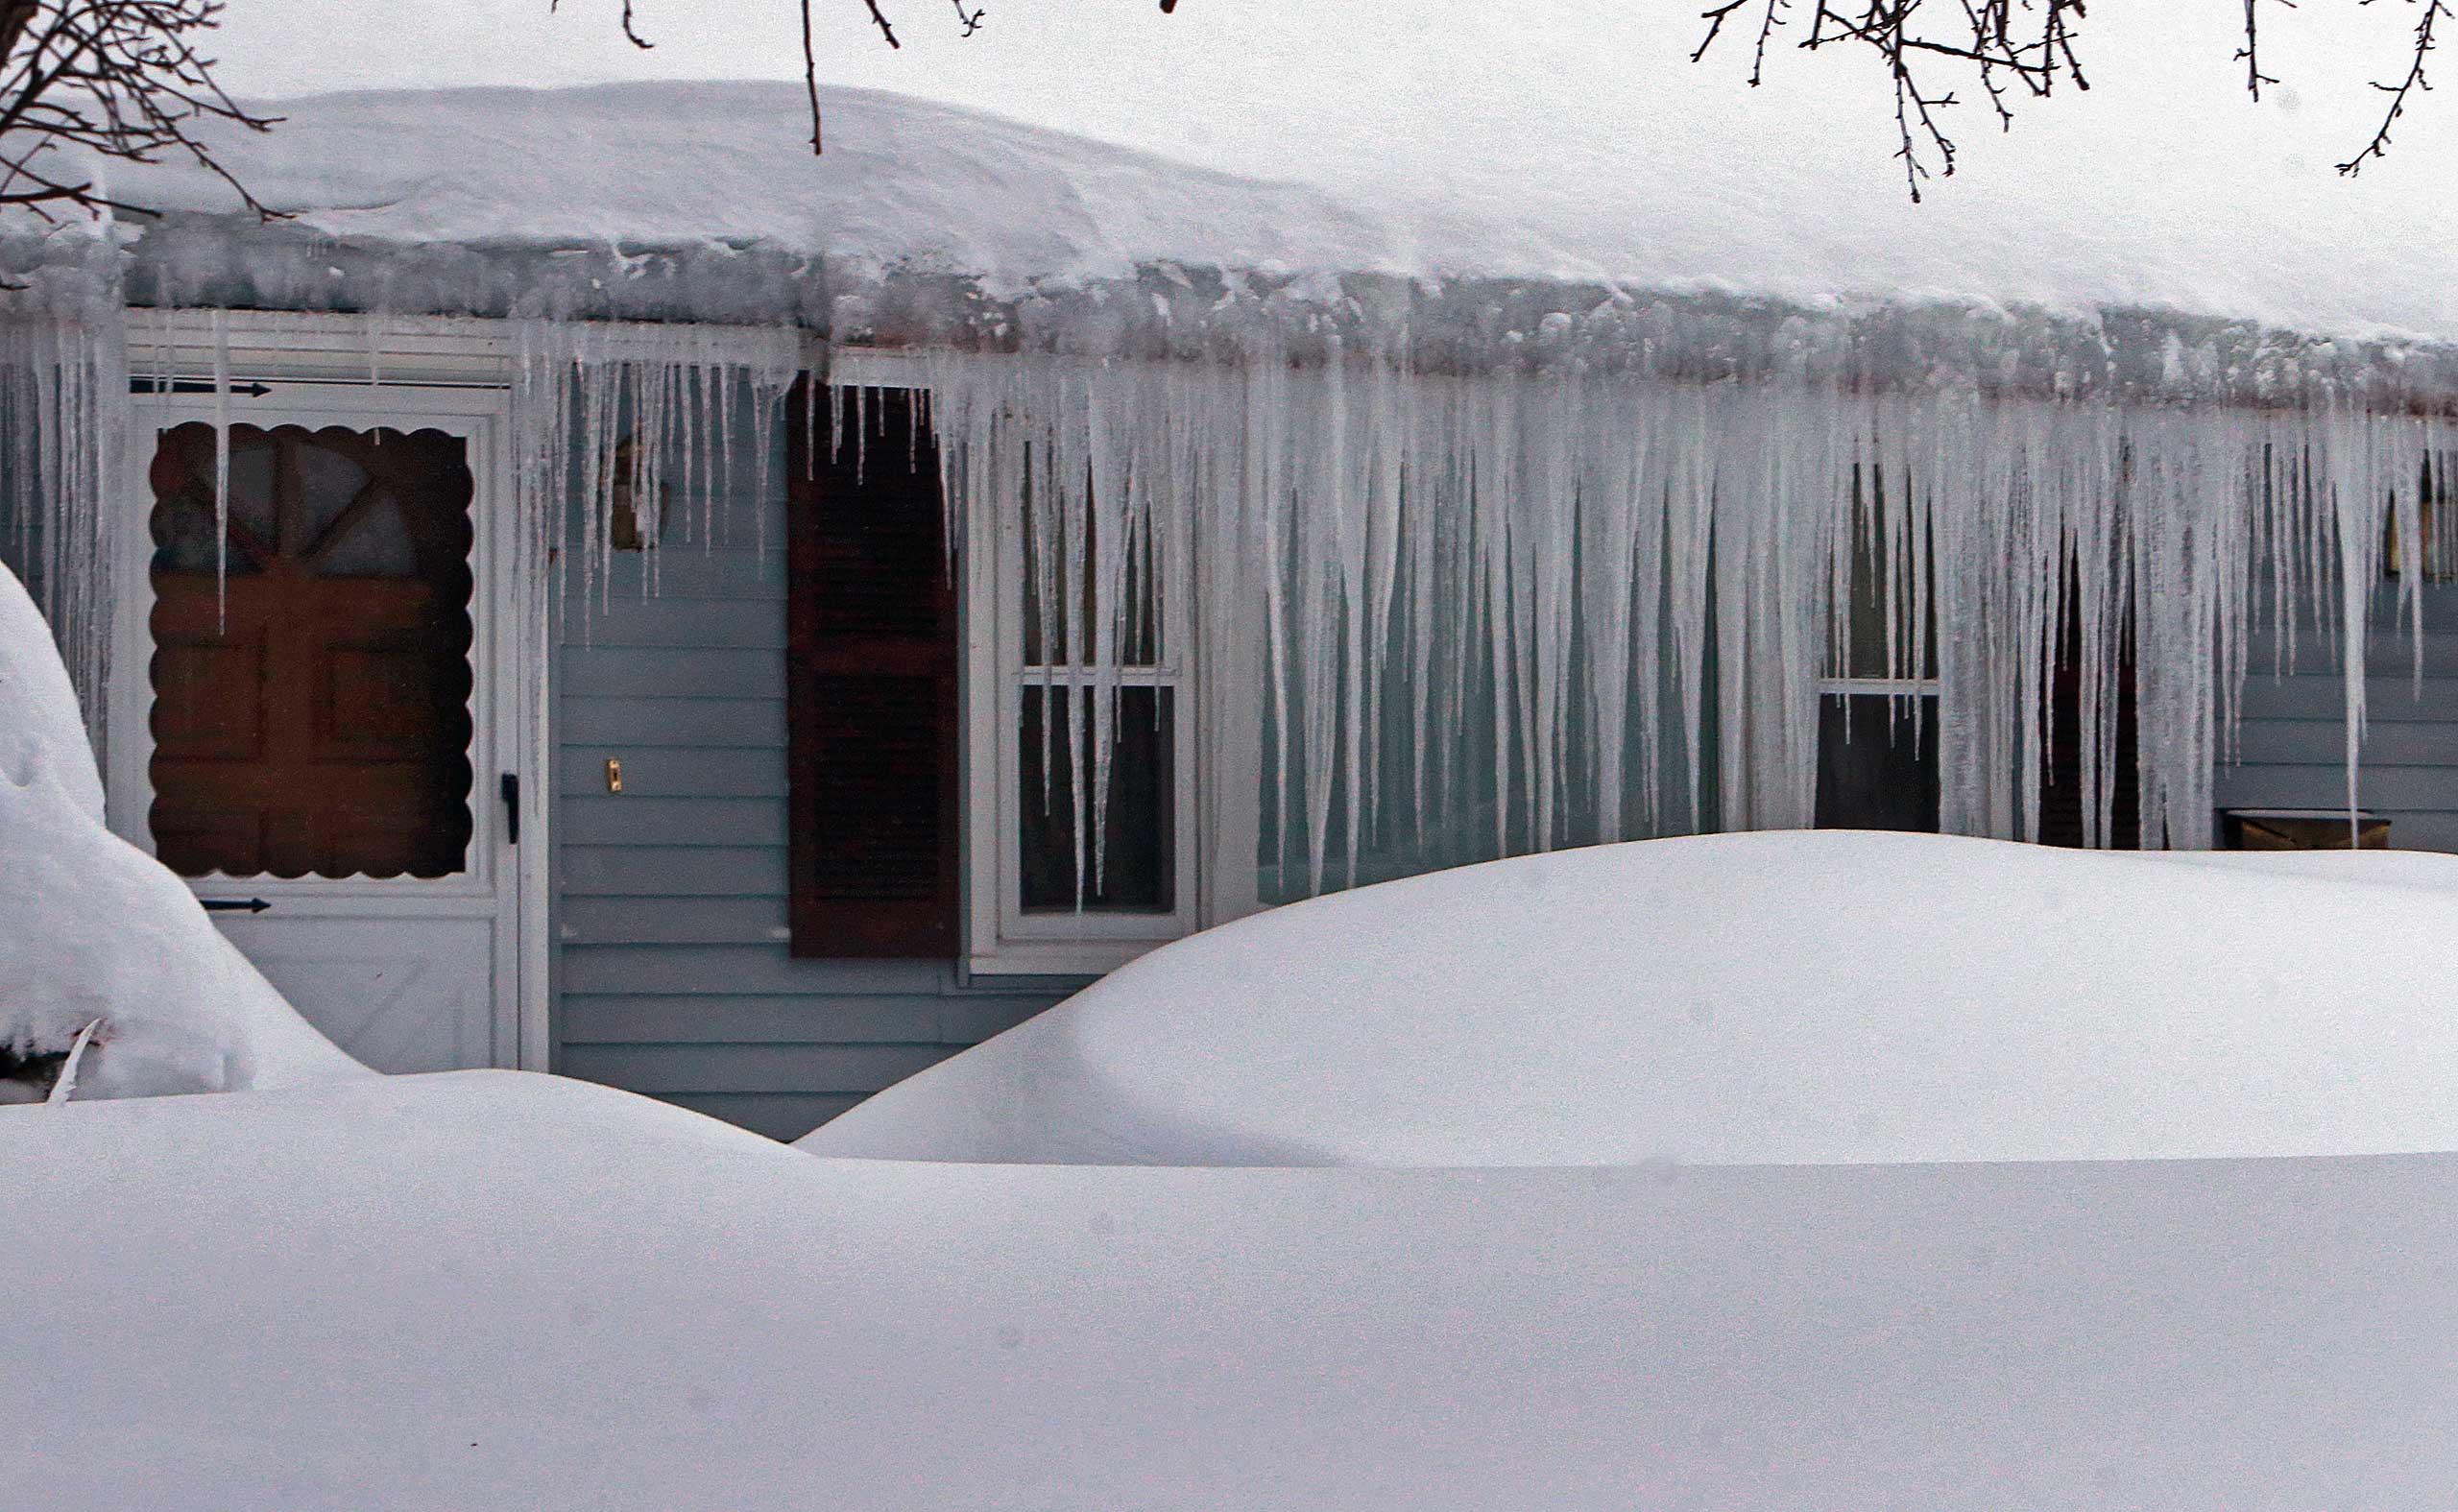 A house is covered in snow and ice on Jane Road in Methuen, Mass. on Feb. 9, 2015.